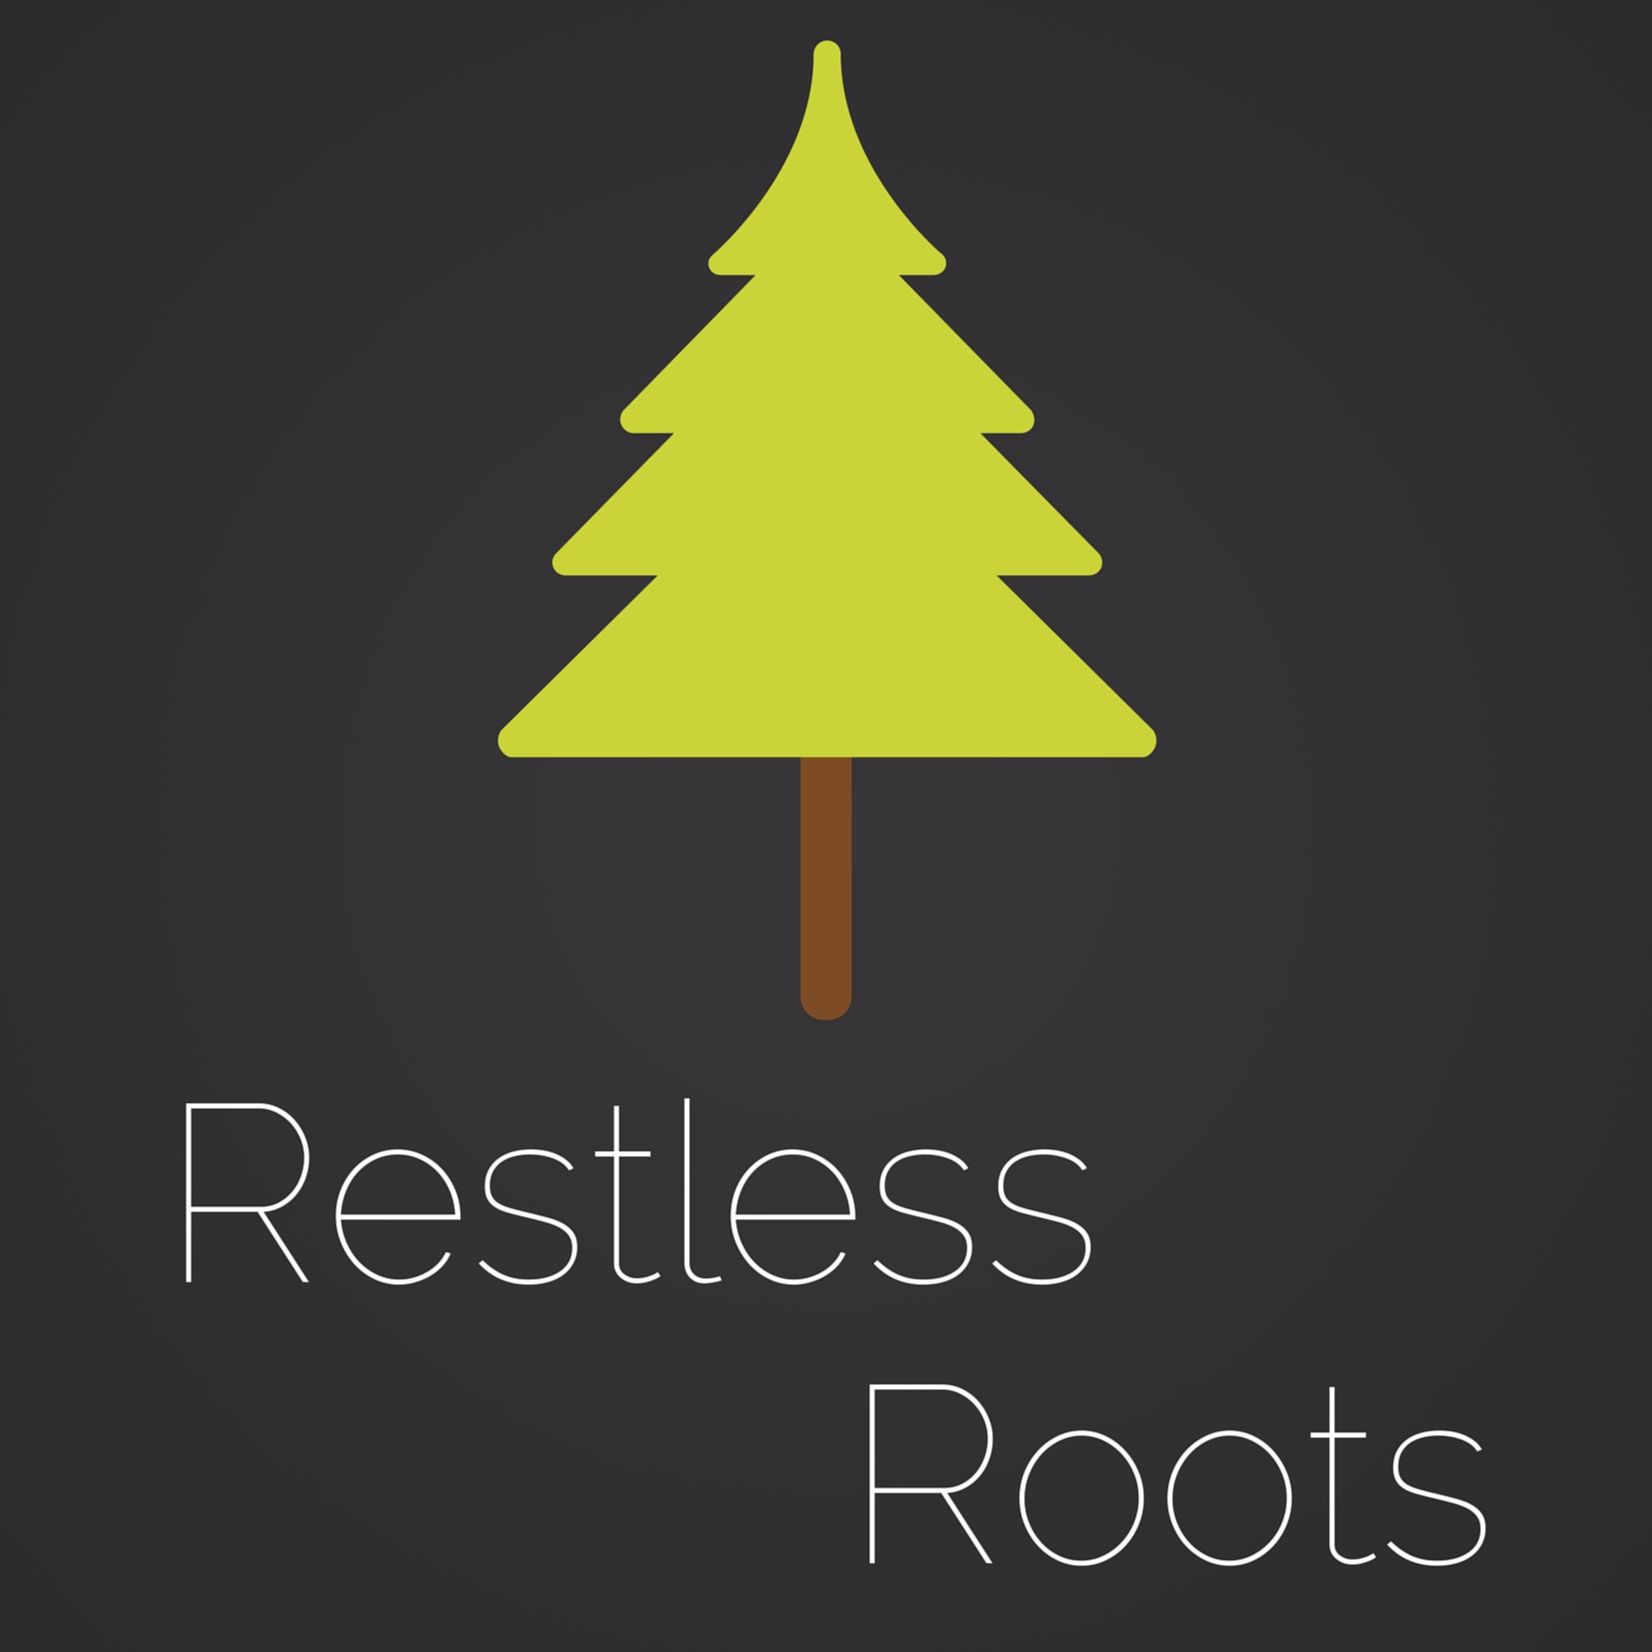 Restless Roots